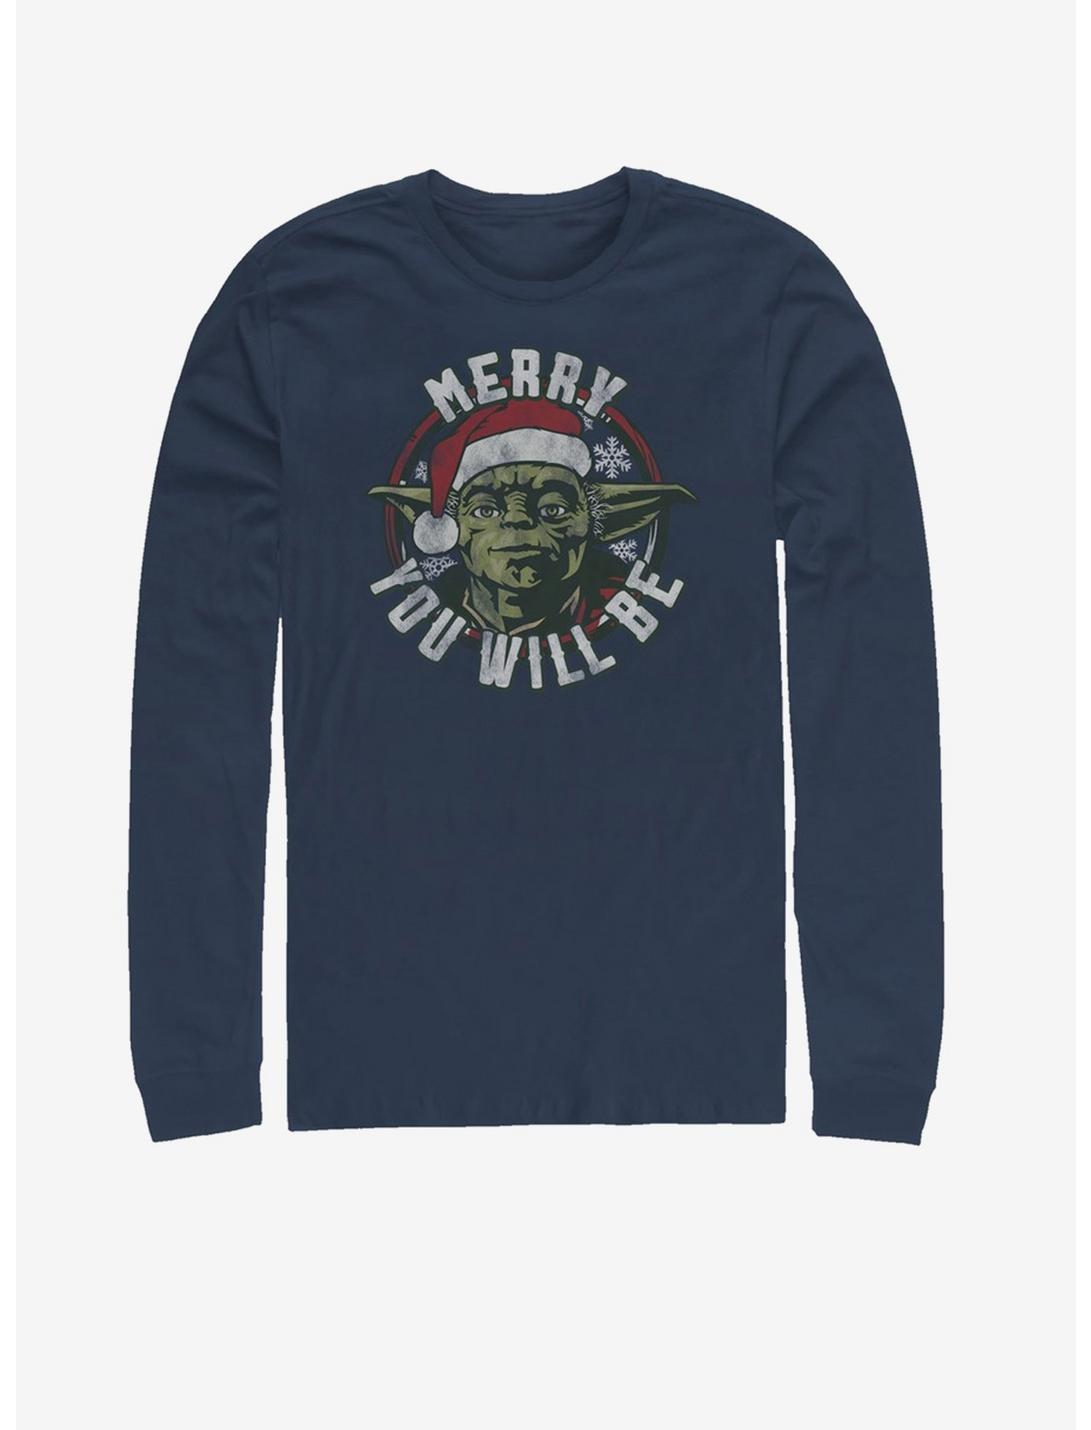 Star Wars Believe You Must Long-Sleeve T-Shirt, NAVY, hi-res